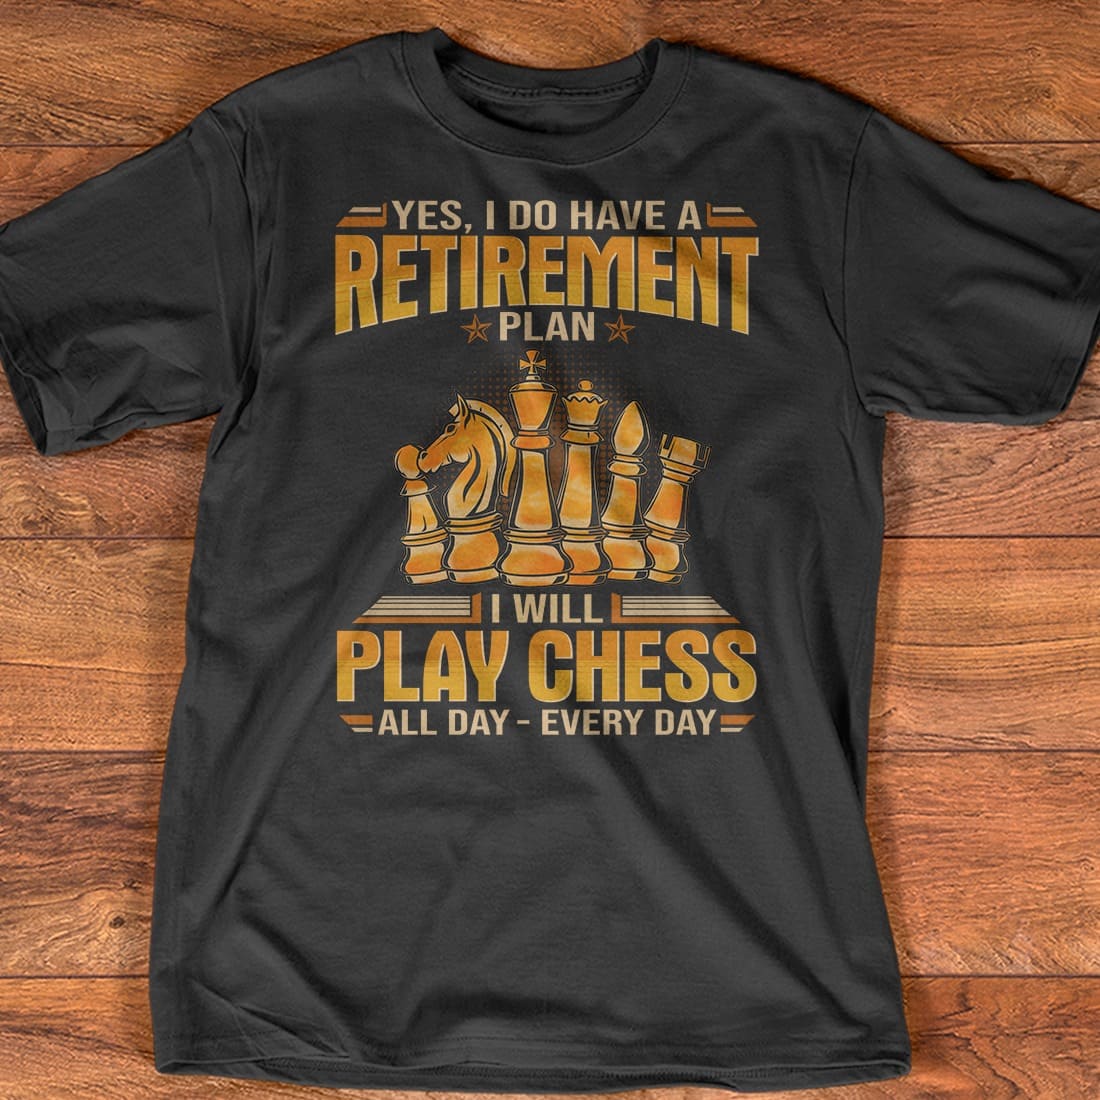 Yes I do have retirement plan I will play chess all day everyday - Love playing chess, retired people gift